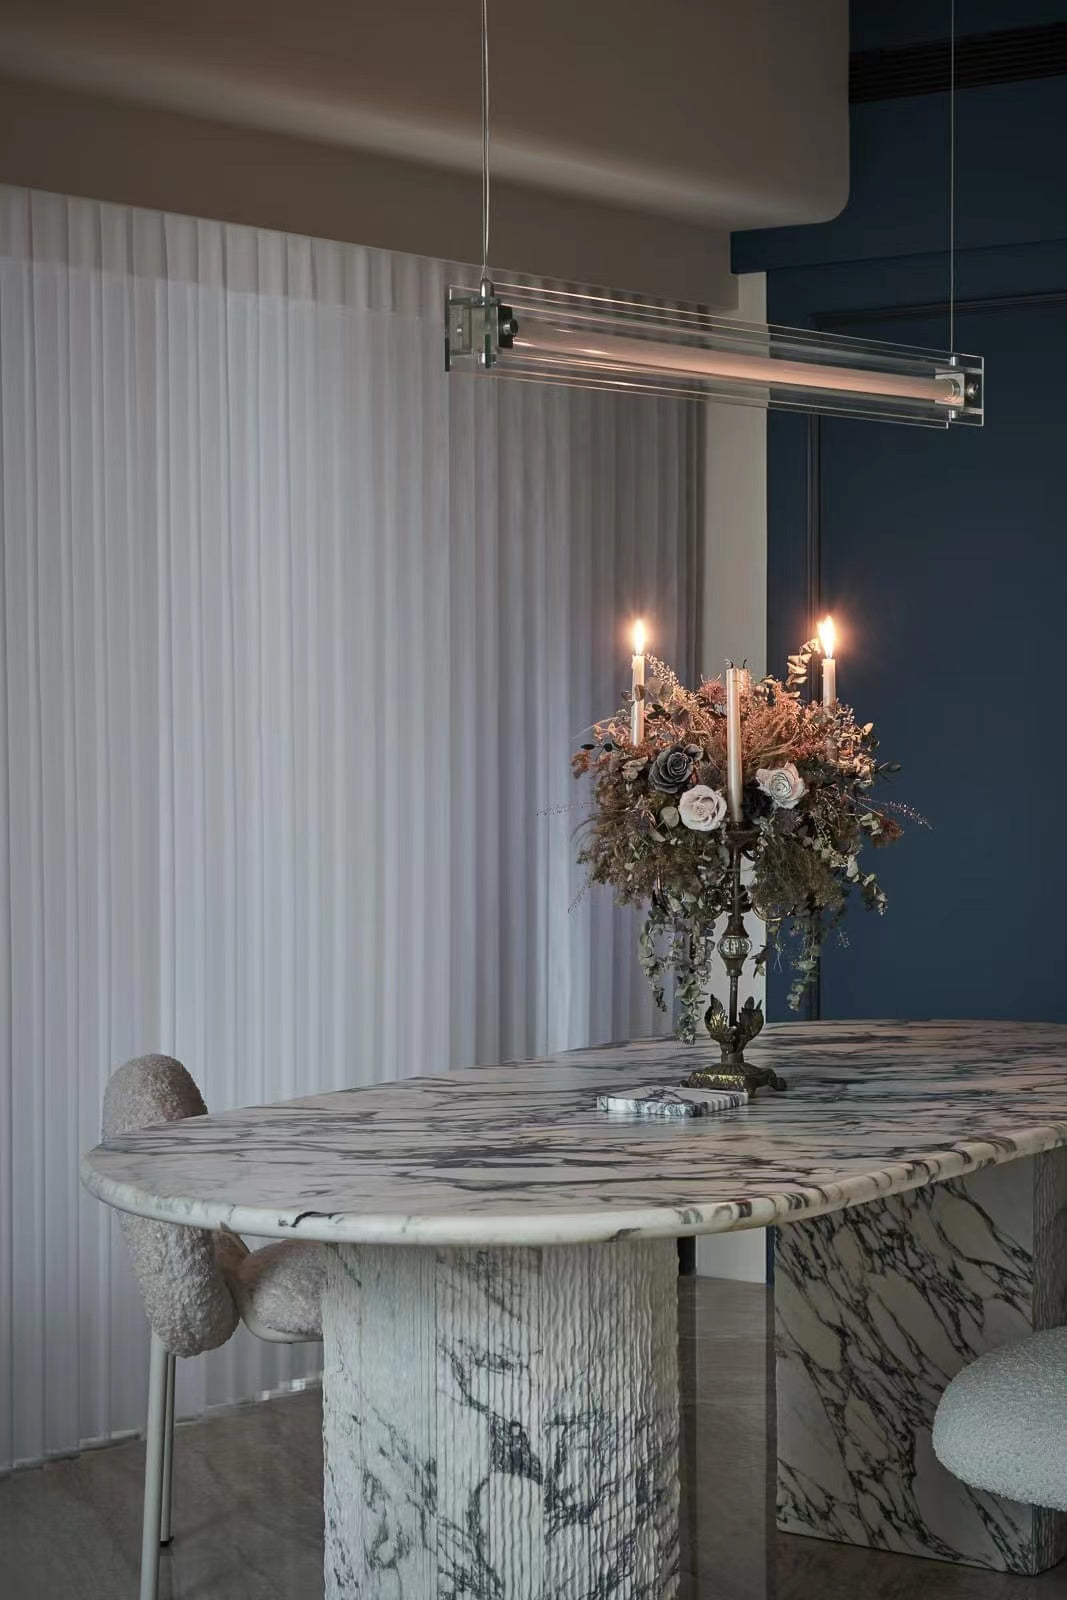 Three Common Surface Protection Treatment Methods for Marble!